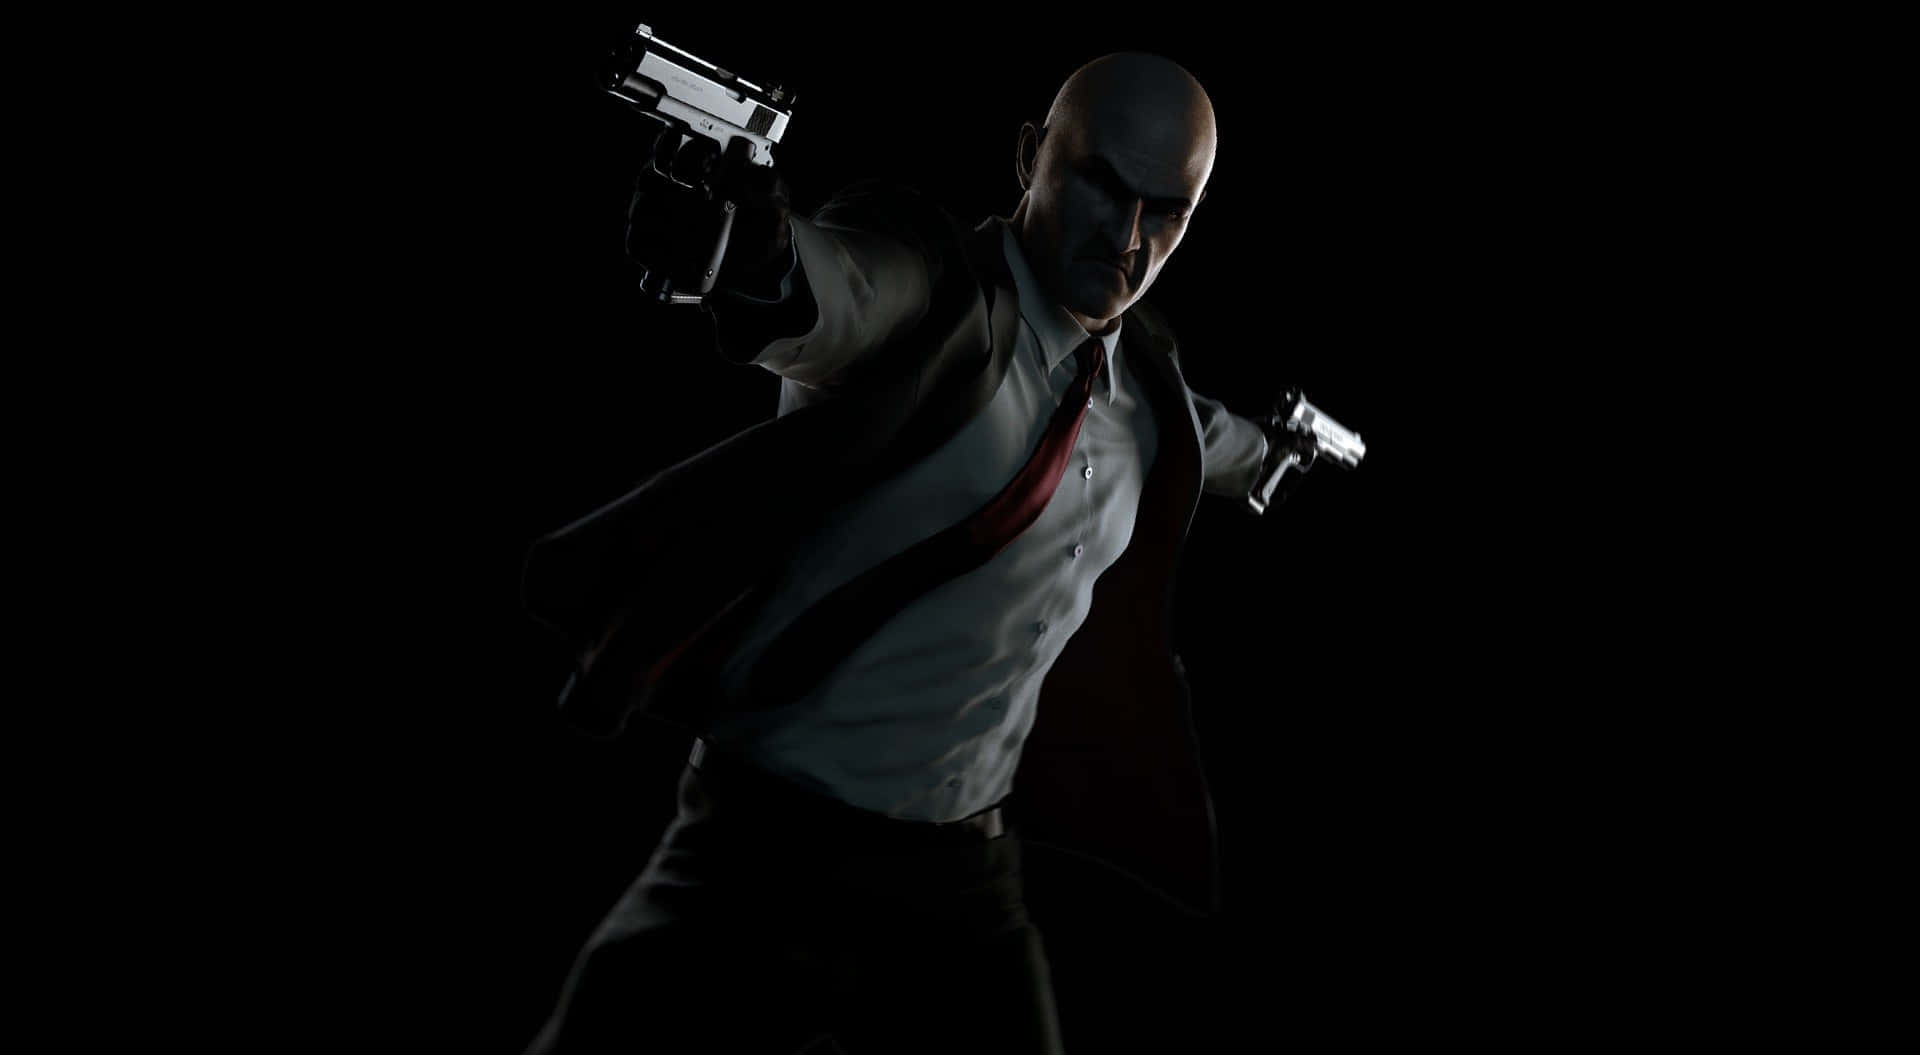 “A classic suited Hitman Desktop wallpaper for gaming and movie fans